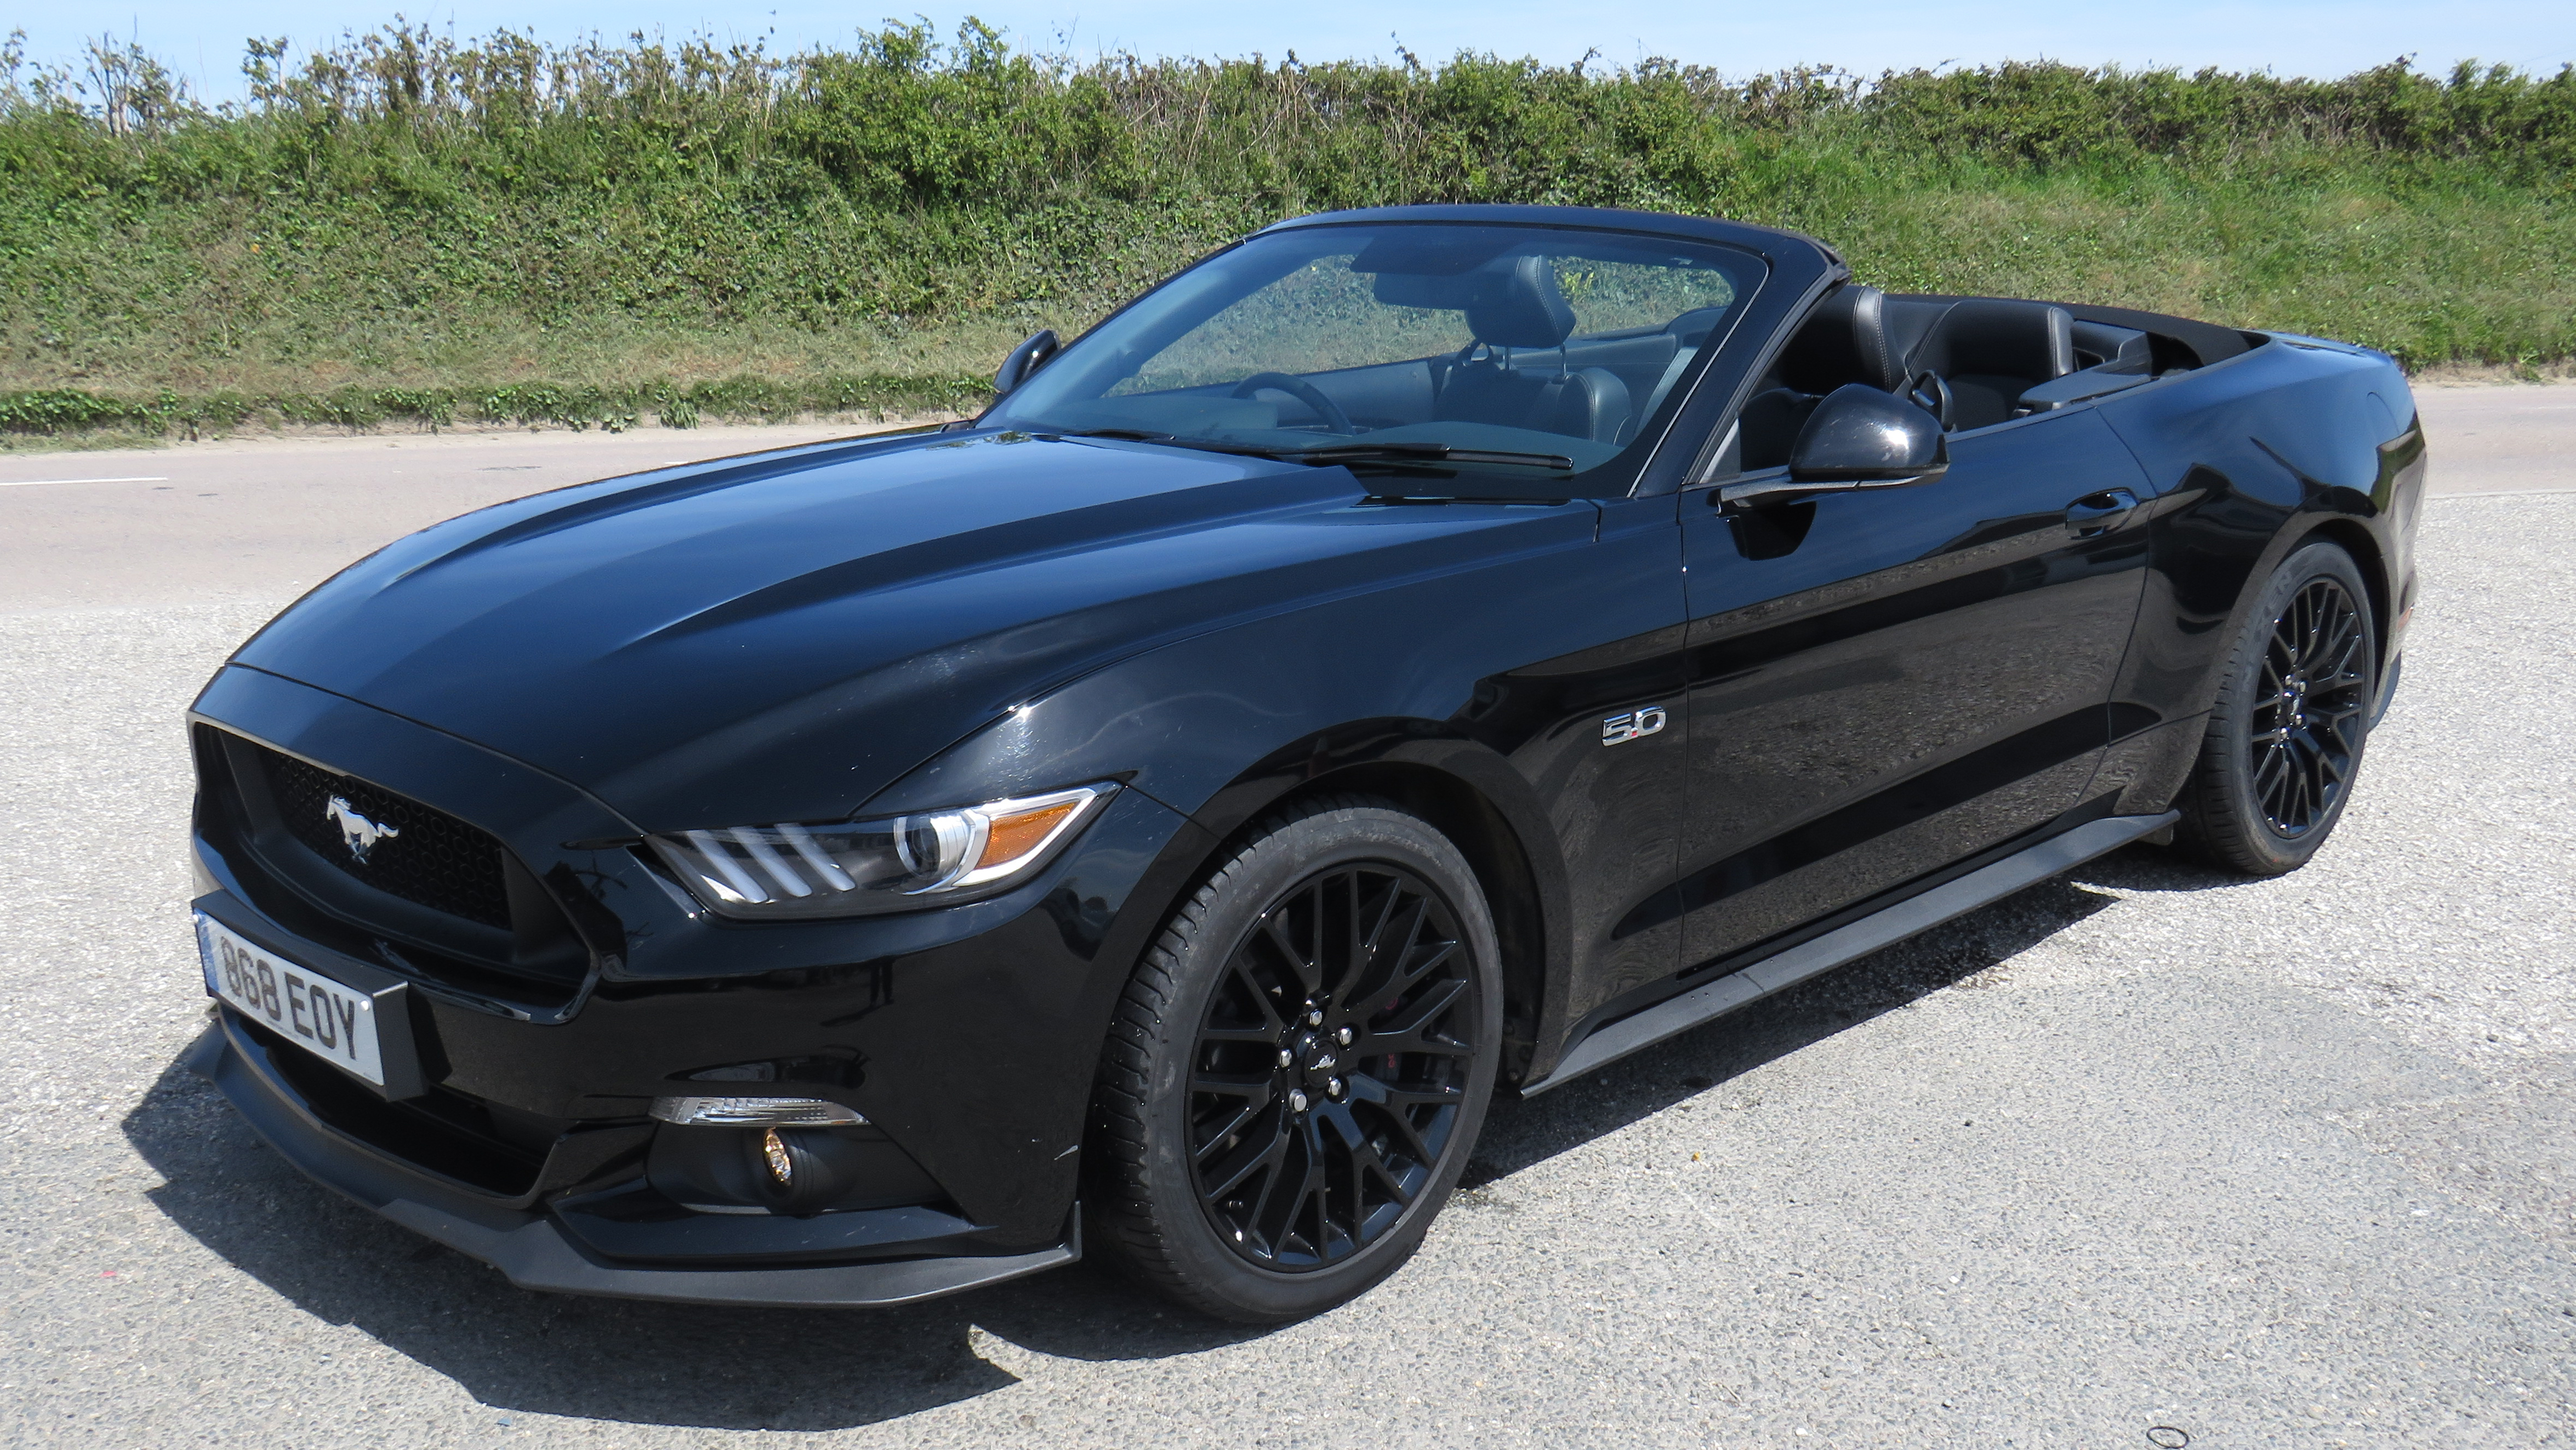 Ford Mustang 5.0L V8 GT Convertible wedding car for hire in Newquay, Cornwall